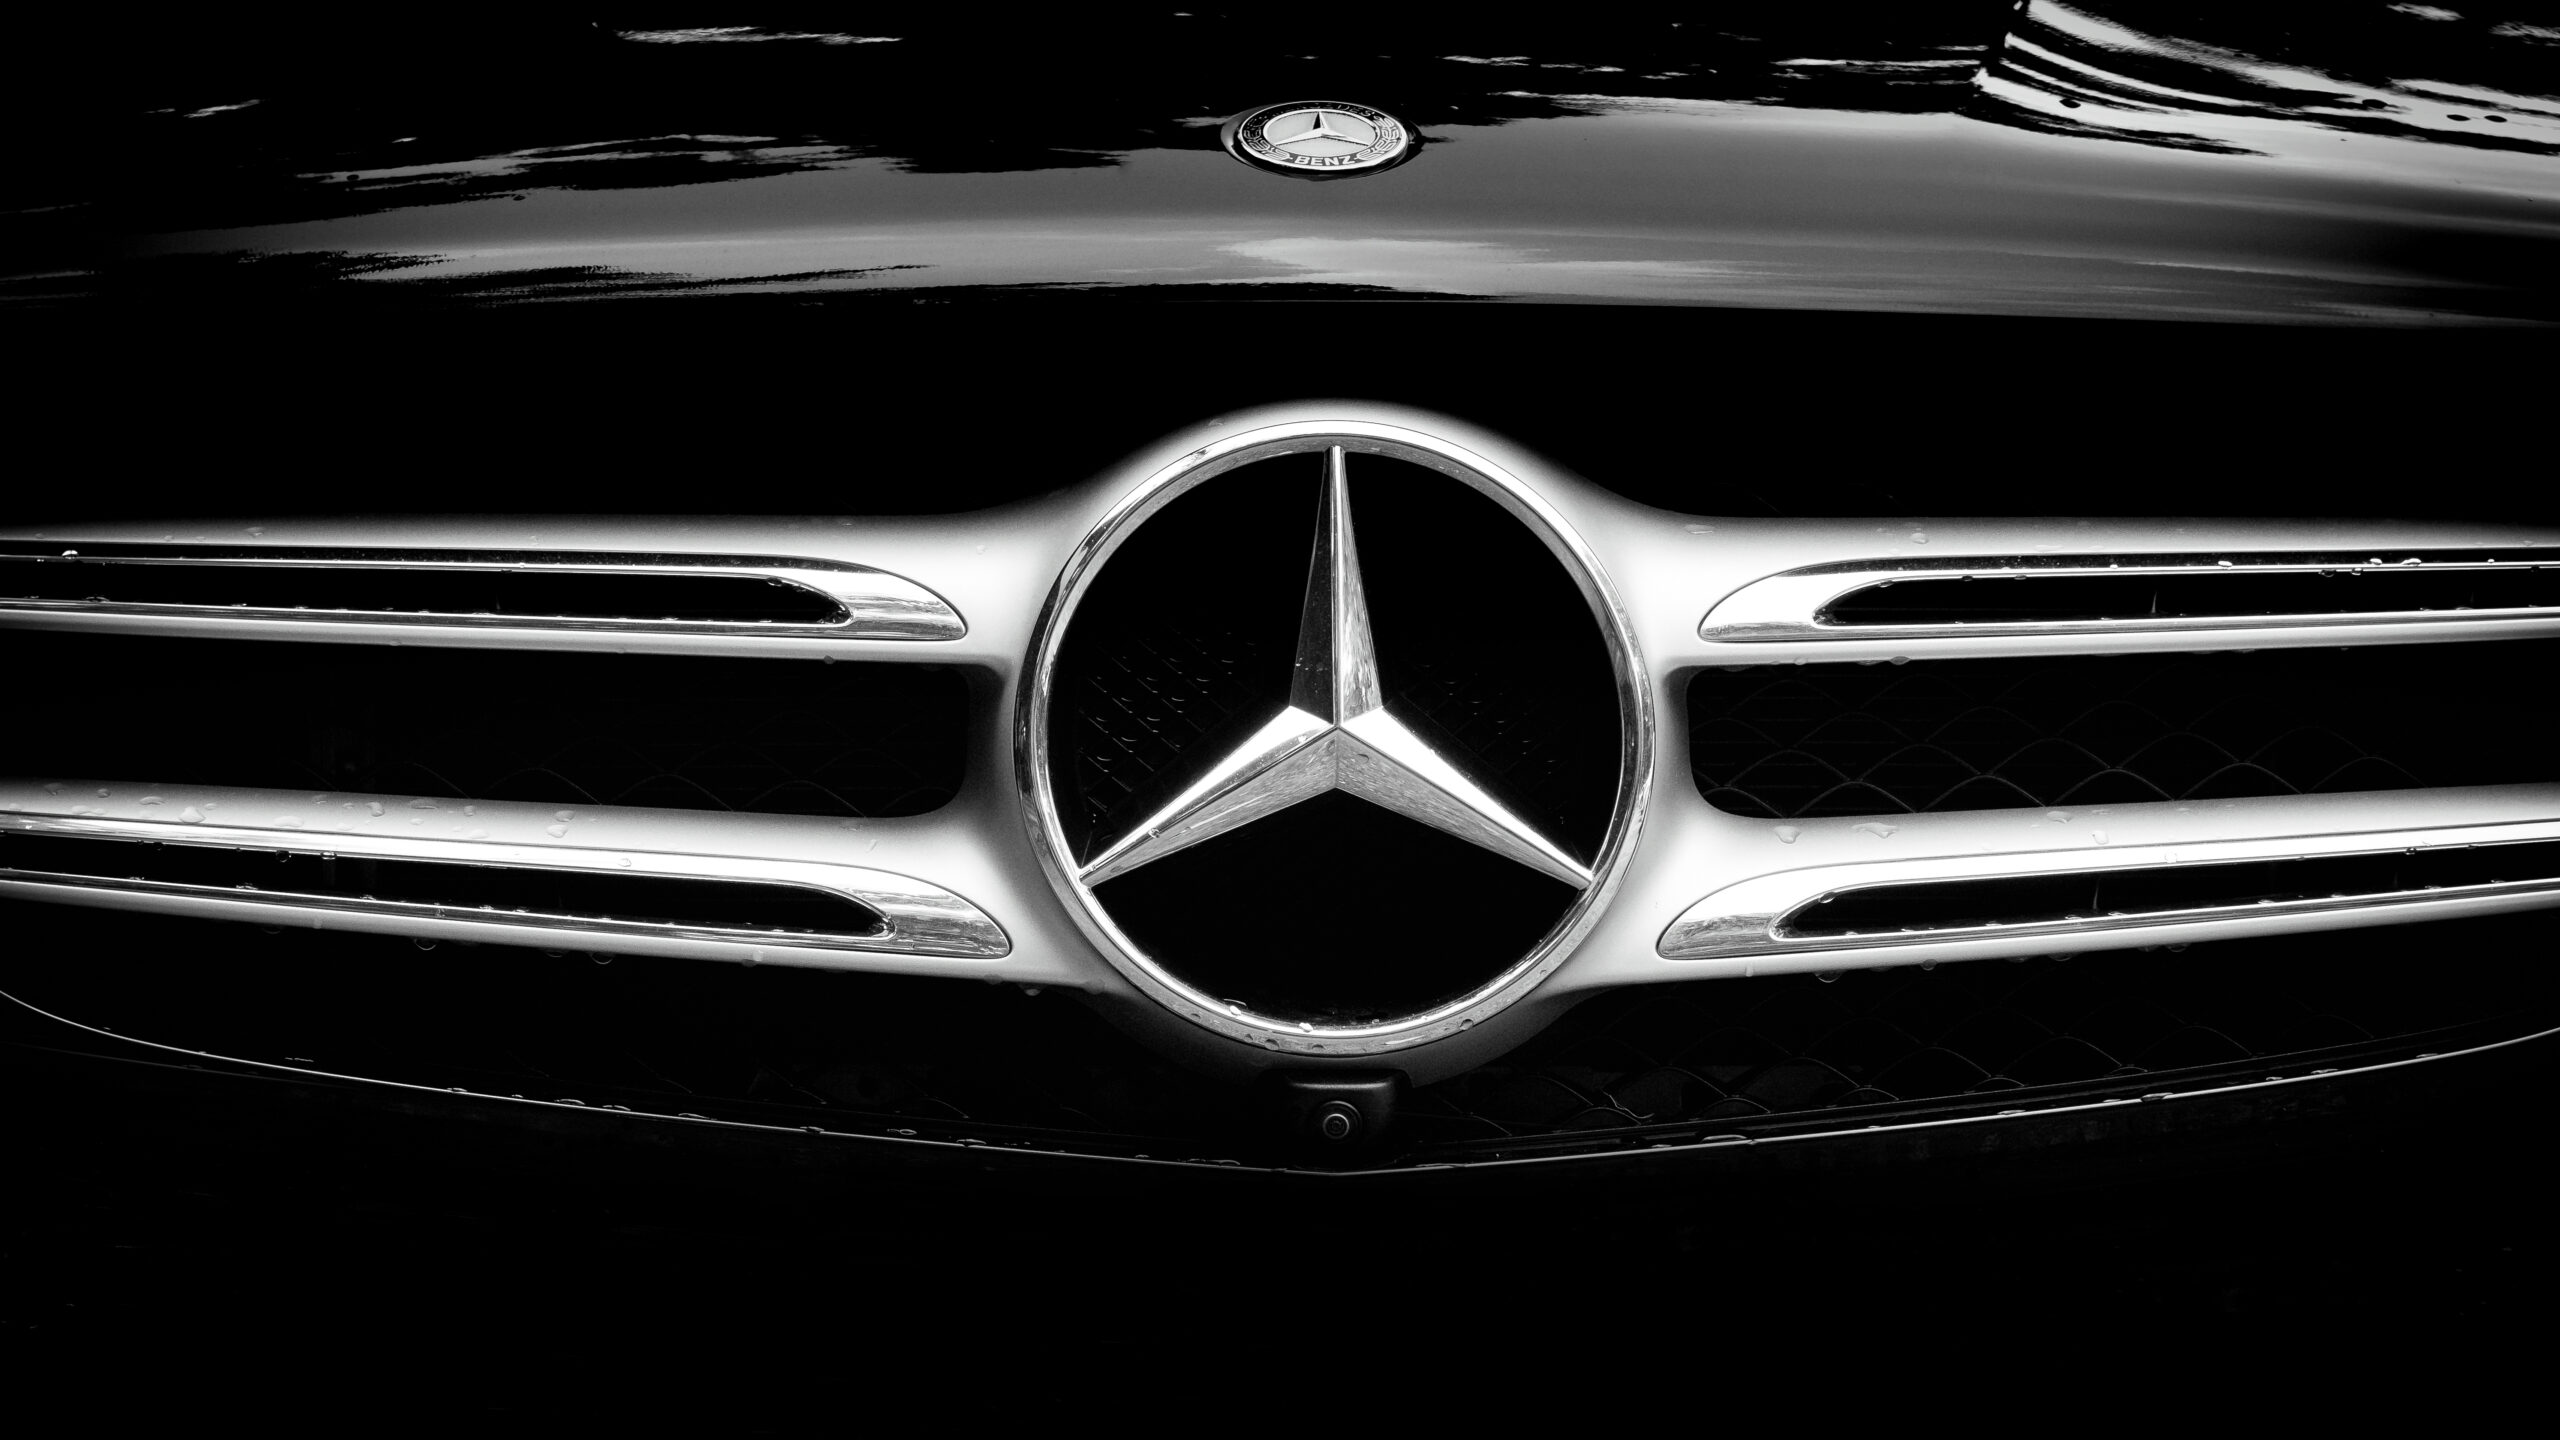 Could Mercedes Benz the rules of trade mark infringement?